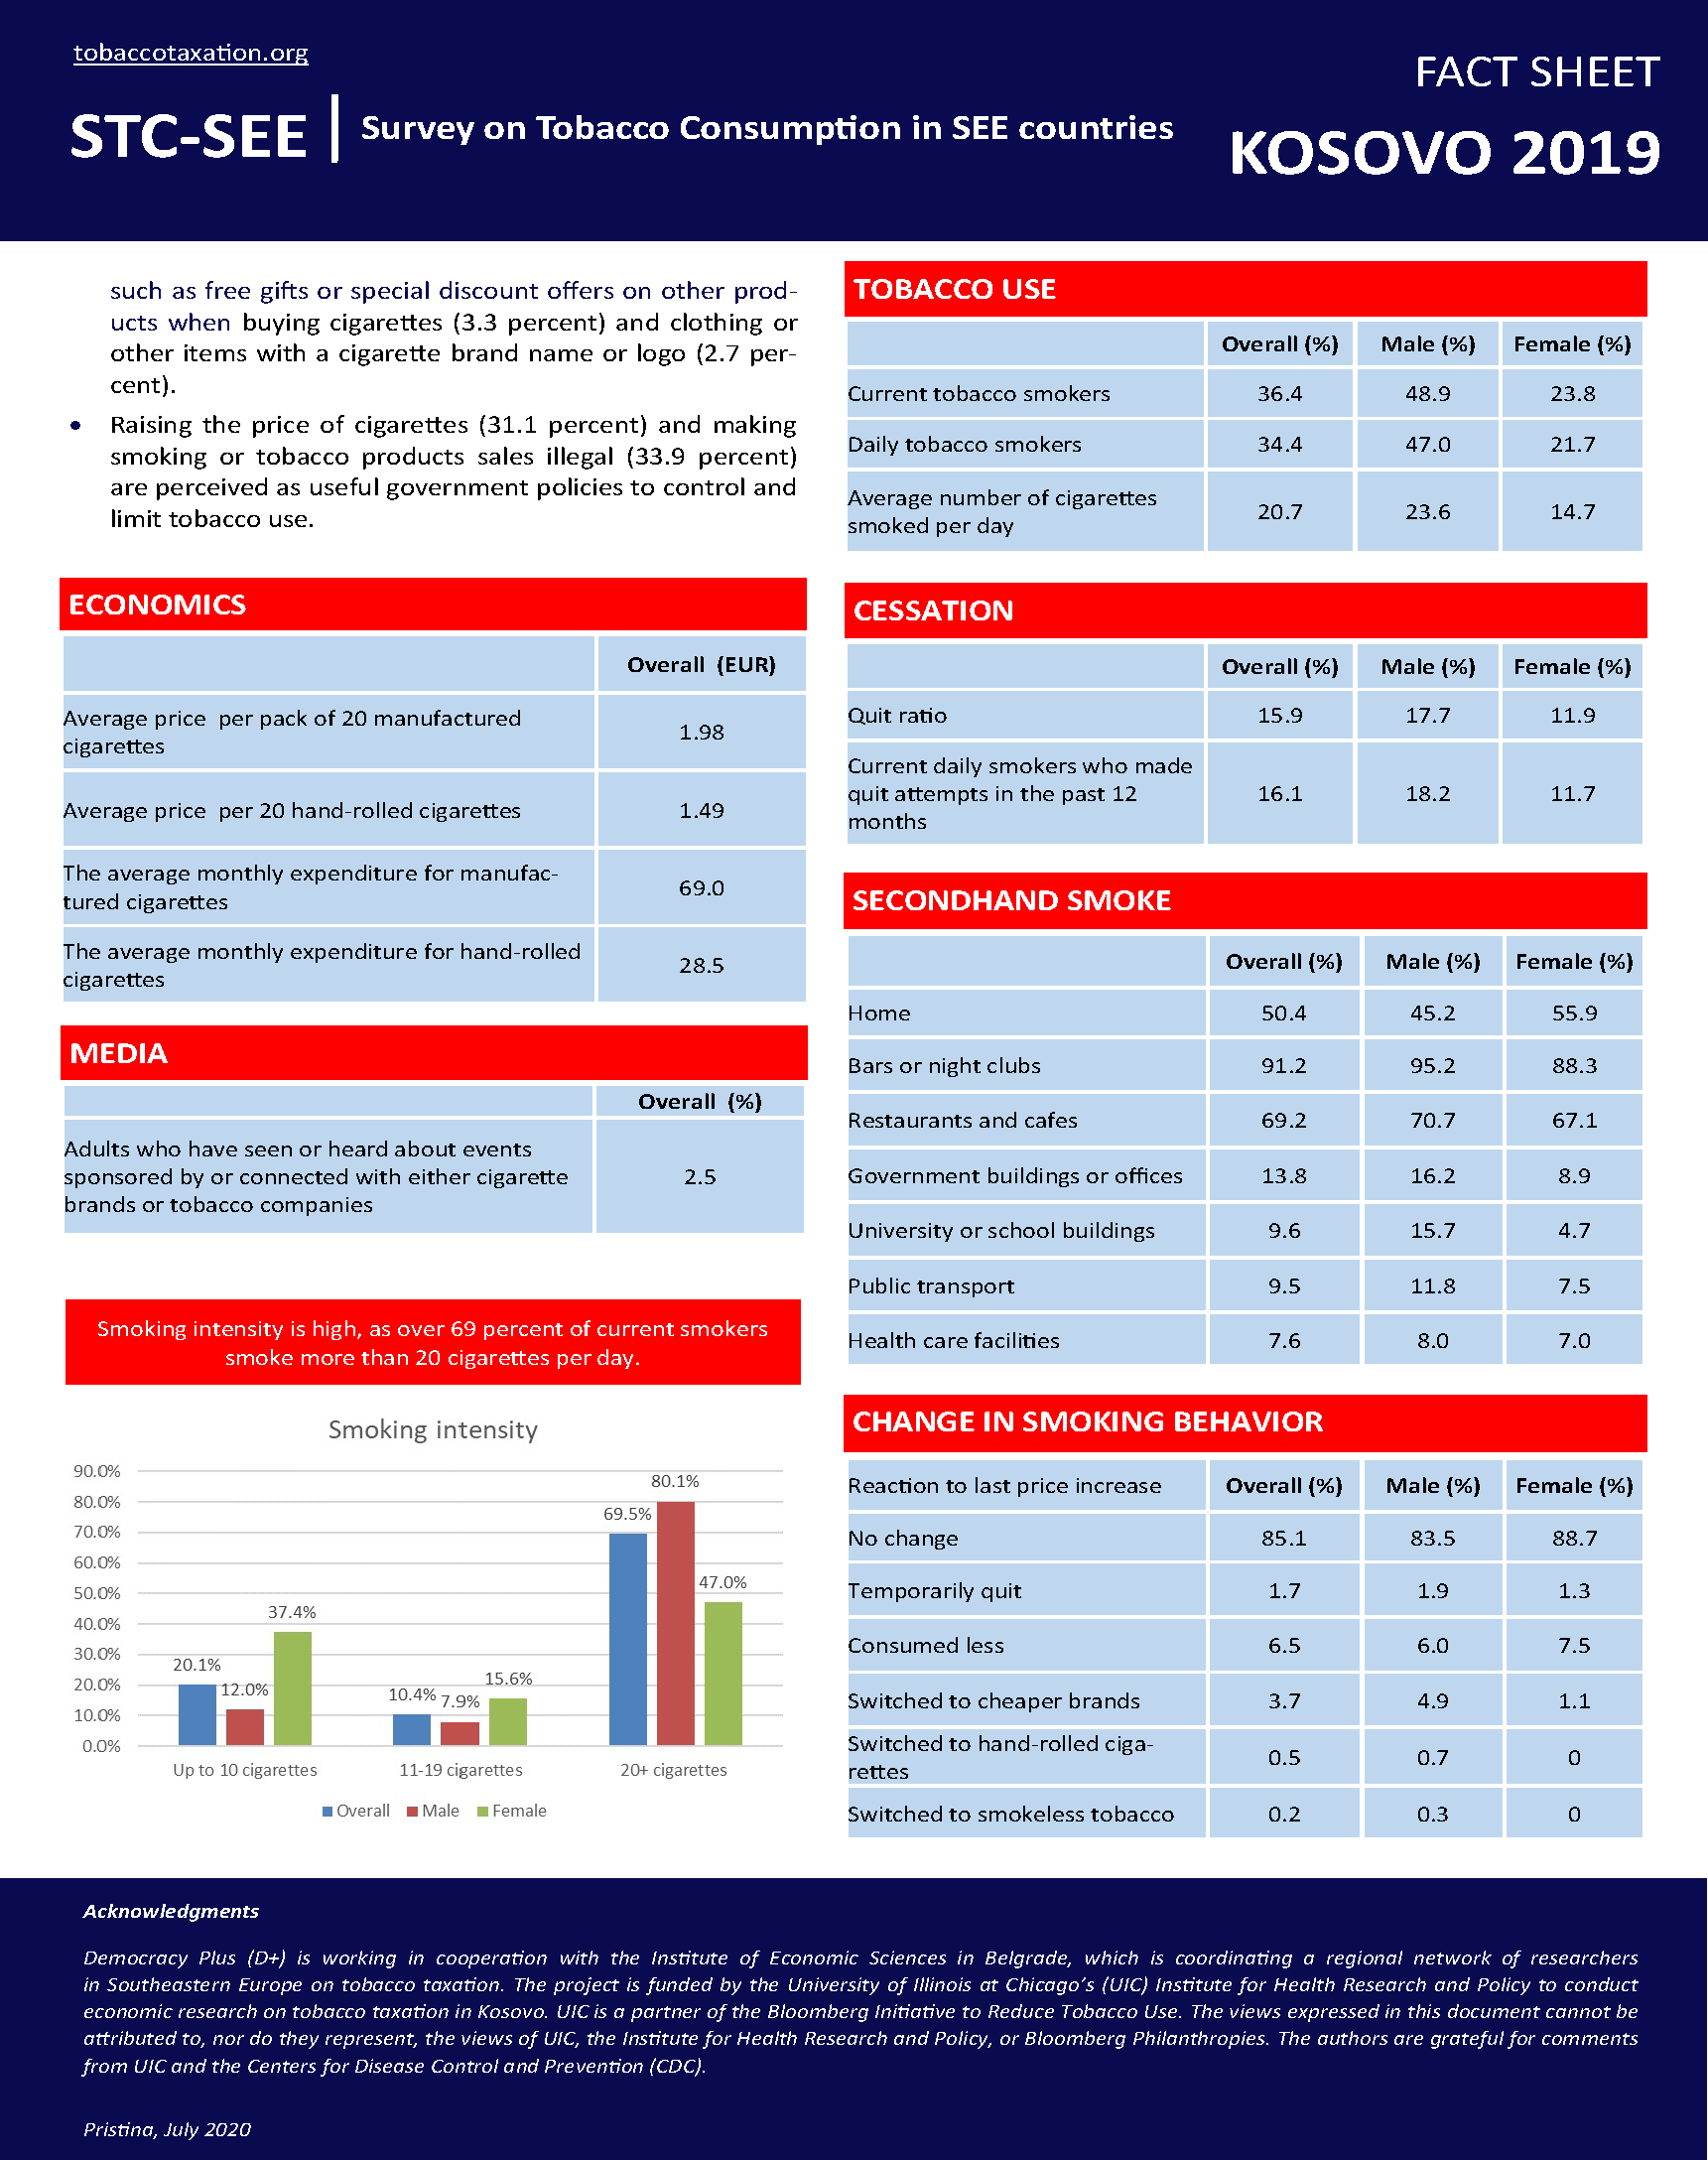 Survey on Tobacco Consumption in SEE Countries – Kosovo 2019 Fact Sheet